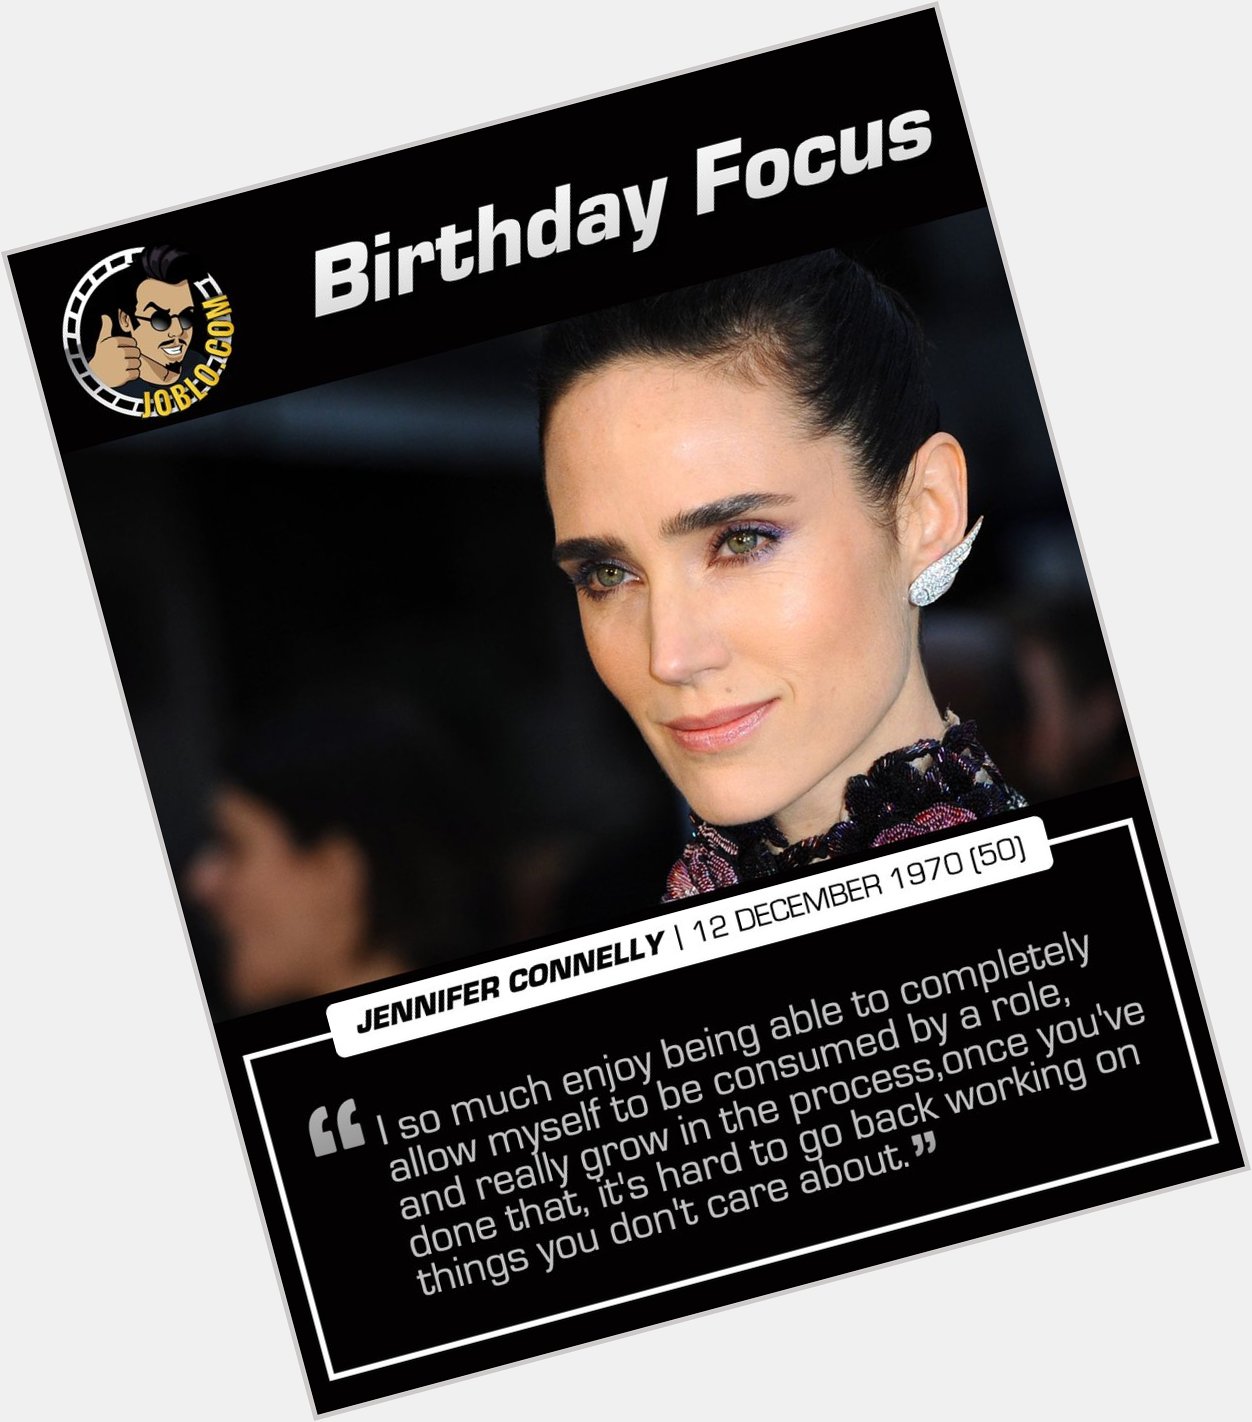 Wishing a very happy 50th birthday to Jennifer Connelly! 